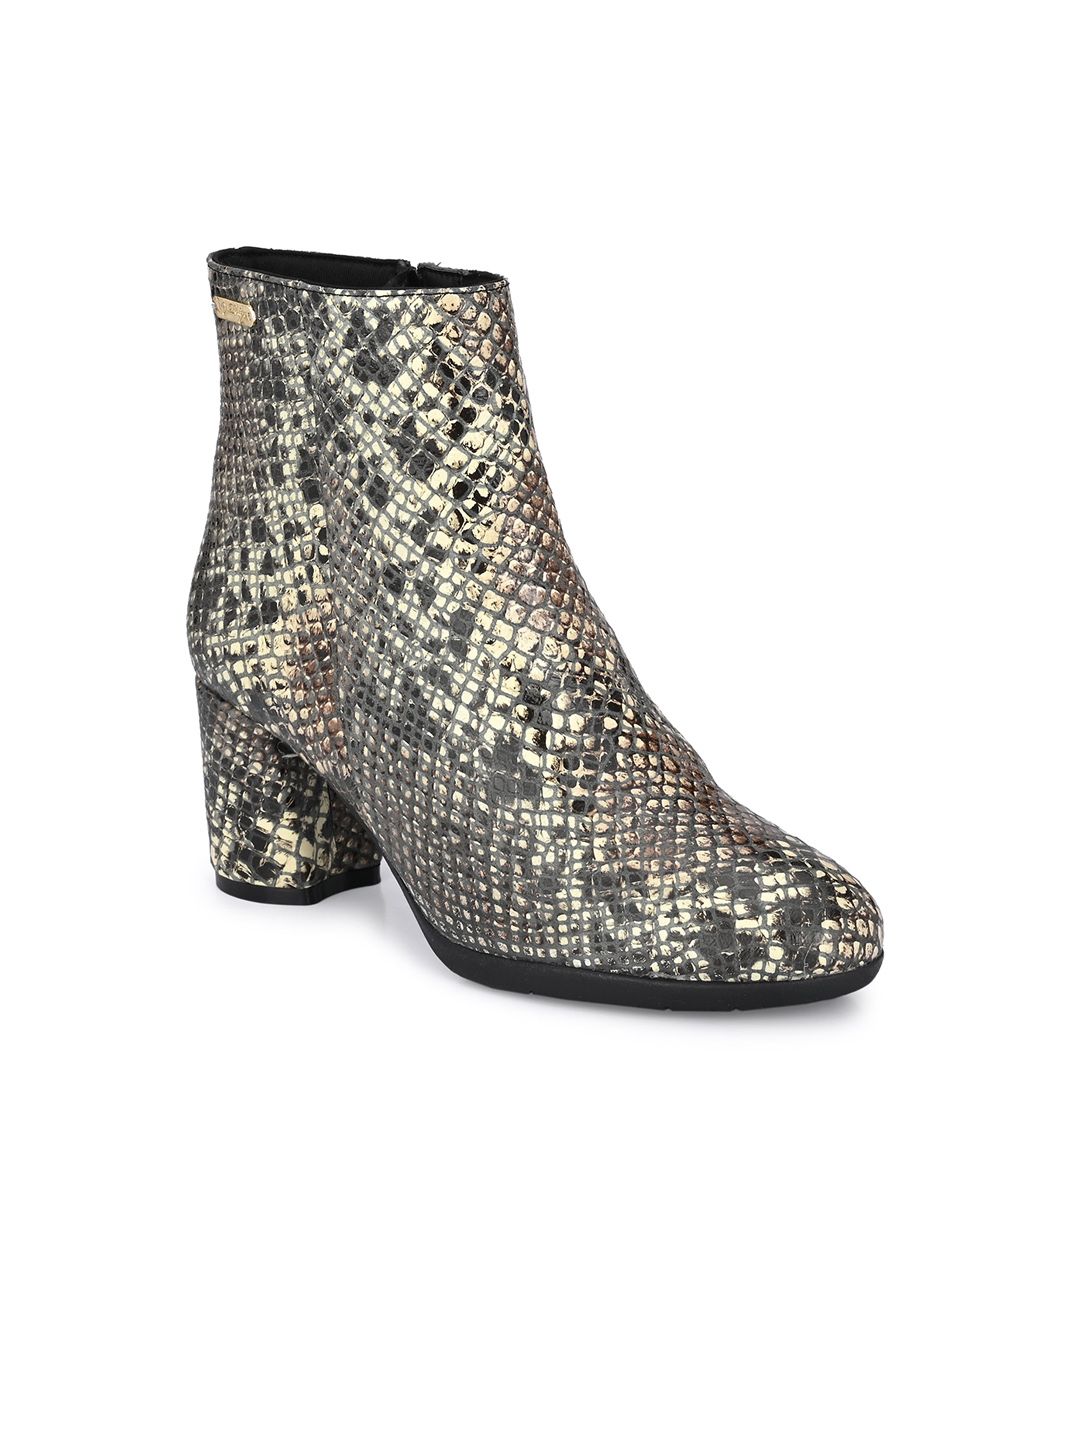 Delize Grey & Off White Textured Leather Block Heeled Boots Price in India